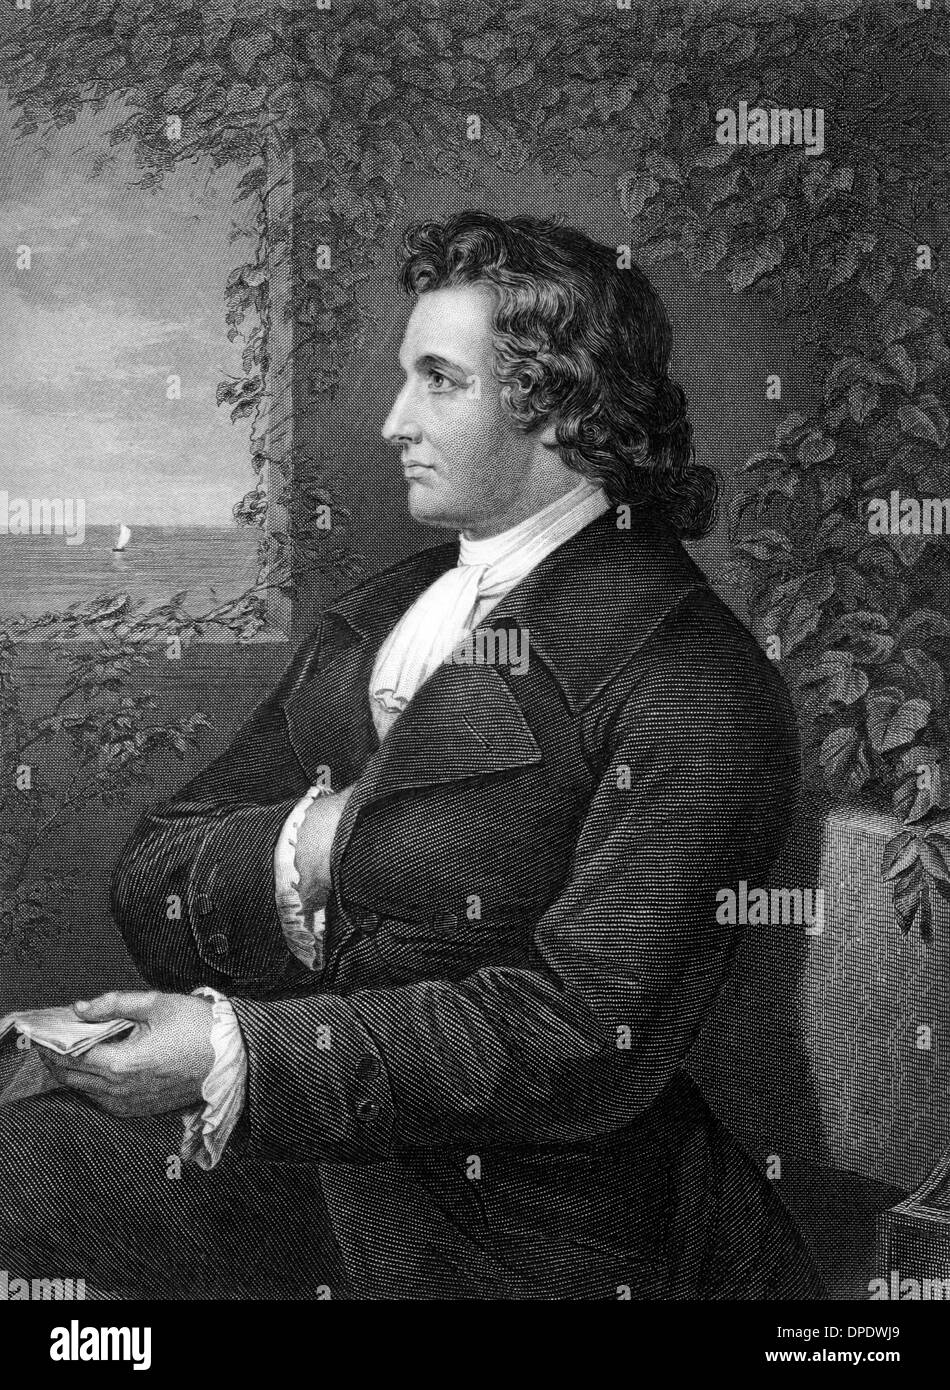 Johann Wolfgang von Goethe (1749-1832) on engraving from 1873. German writer, artist and politician. Stock Photo